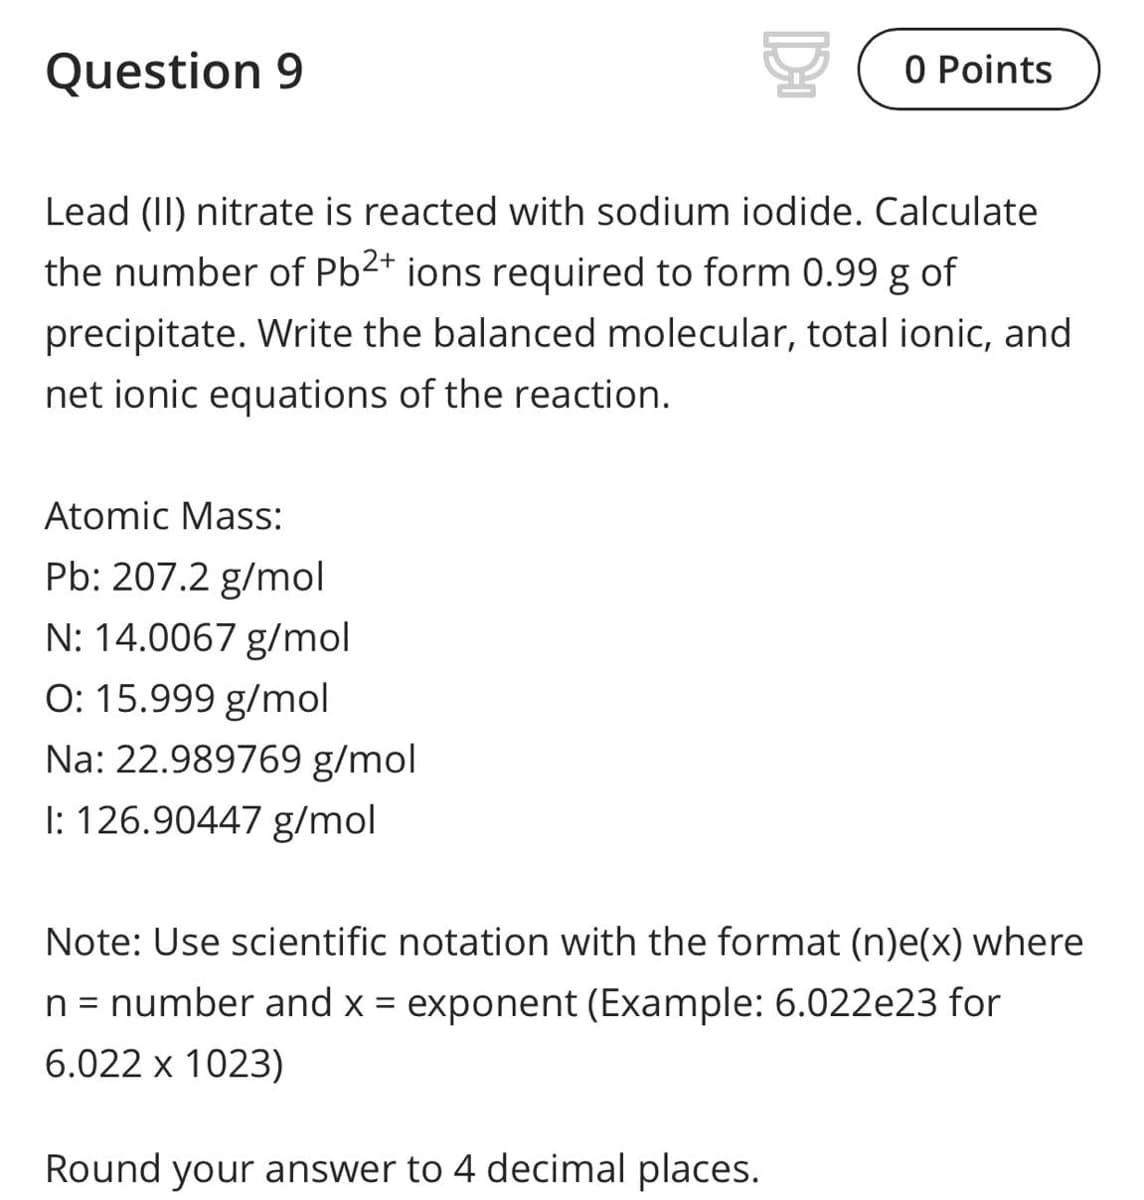 Question 9
O Points
Lead (II) nitrate is reacted with sodium iodide. Calculate
the number of Pb2+ ions required to form 0.99 g of
precipitate. Write the balanced molecular, total ionic, and
net ionic equations of the reaction.
Atomic Mass:
Pb: 207.2 g/mol
N: 14.0067 g/mol
O: 15.999 g/mol
Na: 22.989769 g/mol
I: 126.90447 g/mol
Note: Use scientific notation with the format (n)e(x) where
n = number and x = exponent (Example: 6.022e23 for
6.022 x 1023)
Round your answer to 4 decimal places.
